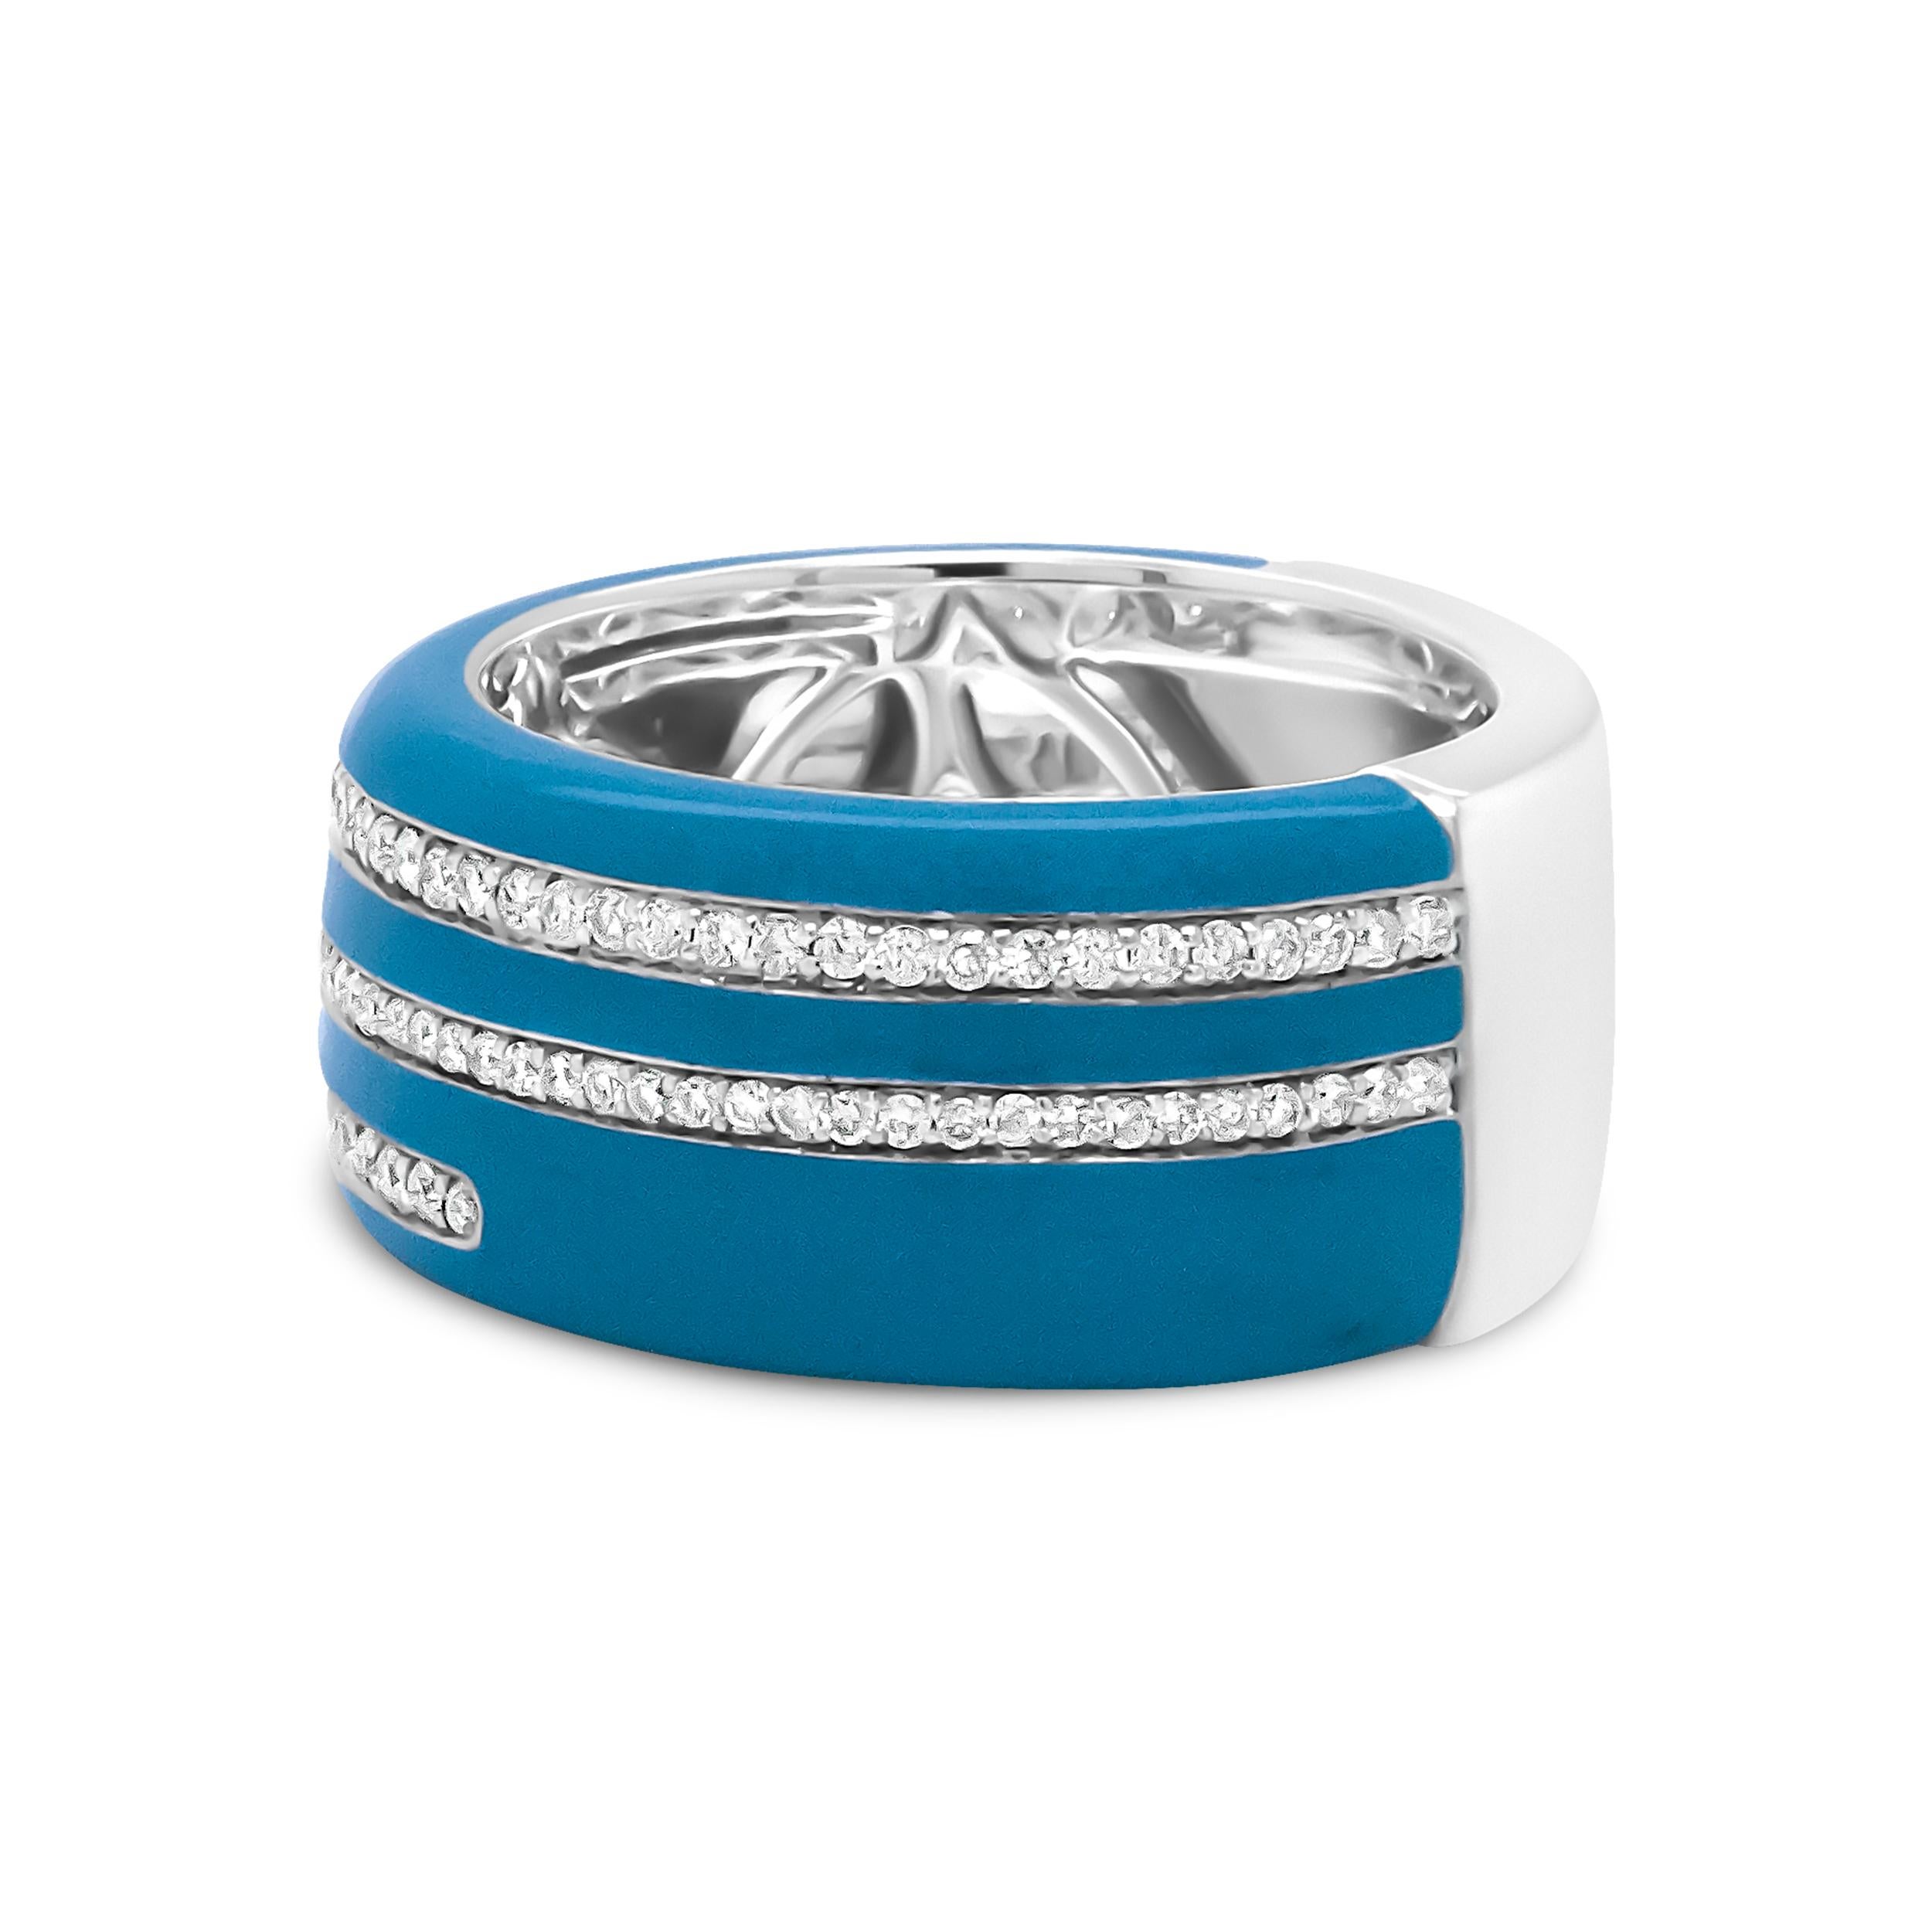 Love to stand out when it comes to your fashion choices? Look no further than this remarkable statement ring made of fine .925 sterling silver with turquoise enamel. Straight lines take on a horizontal path, comprised of round diamonds secured